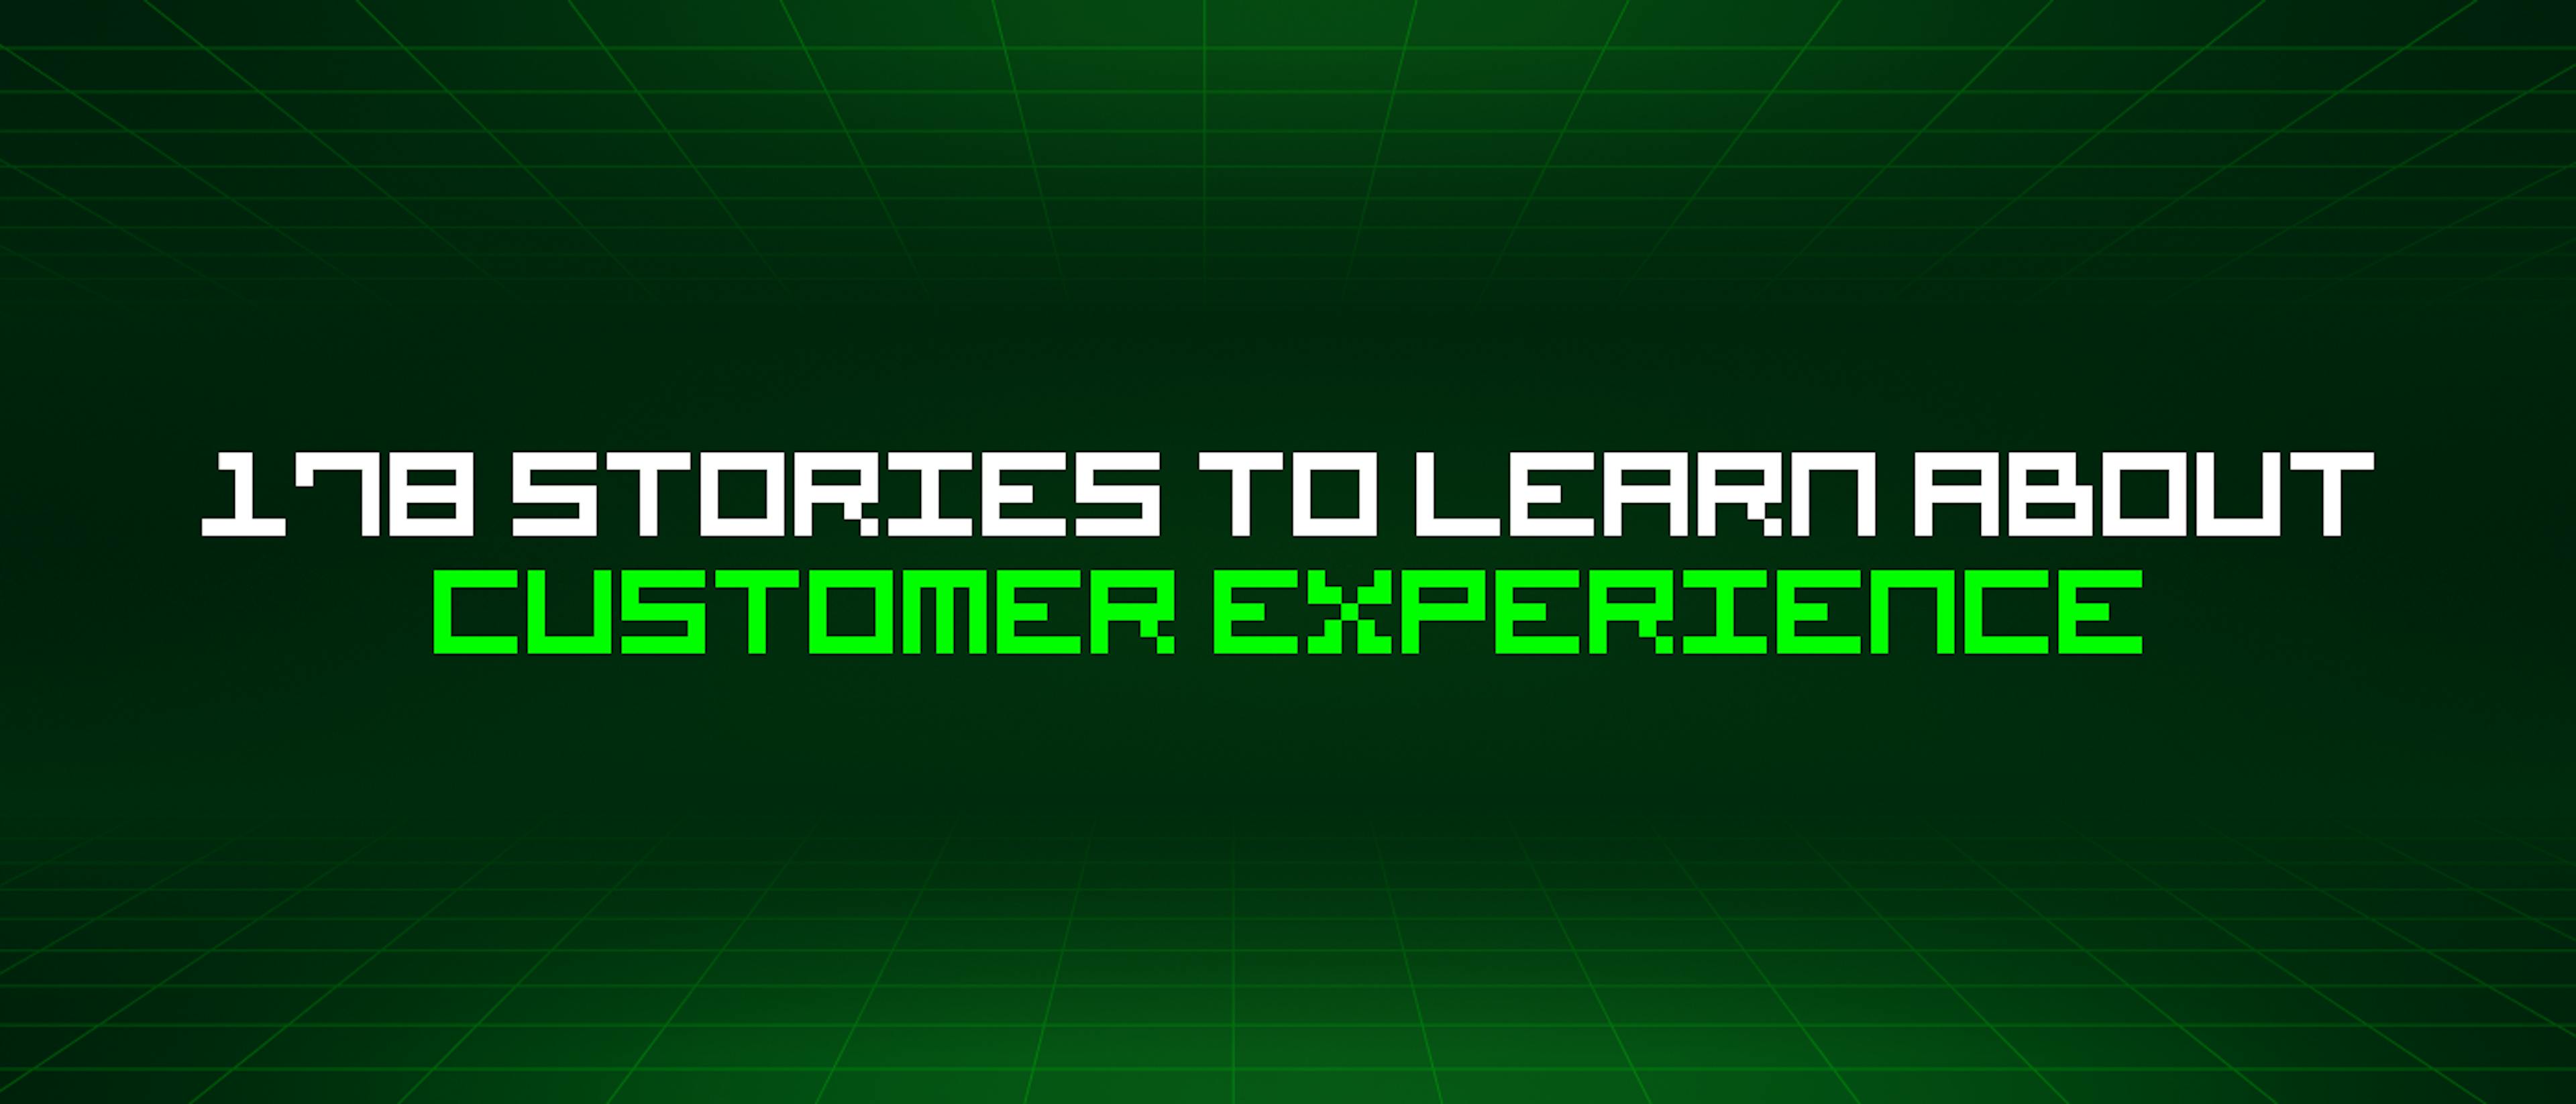 /178-stories-to-learn-about-customer-experience feature image